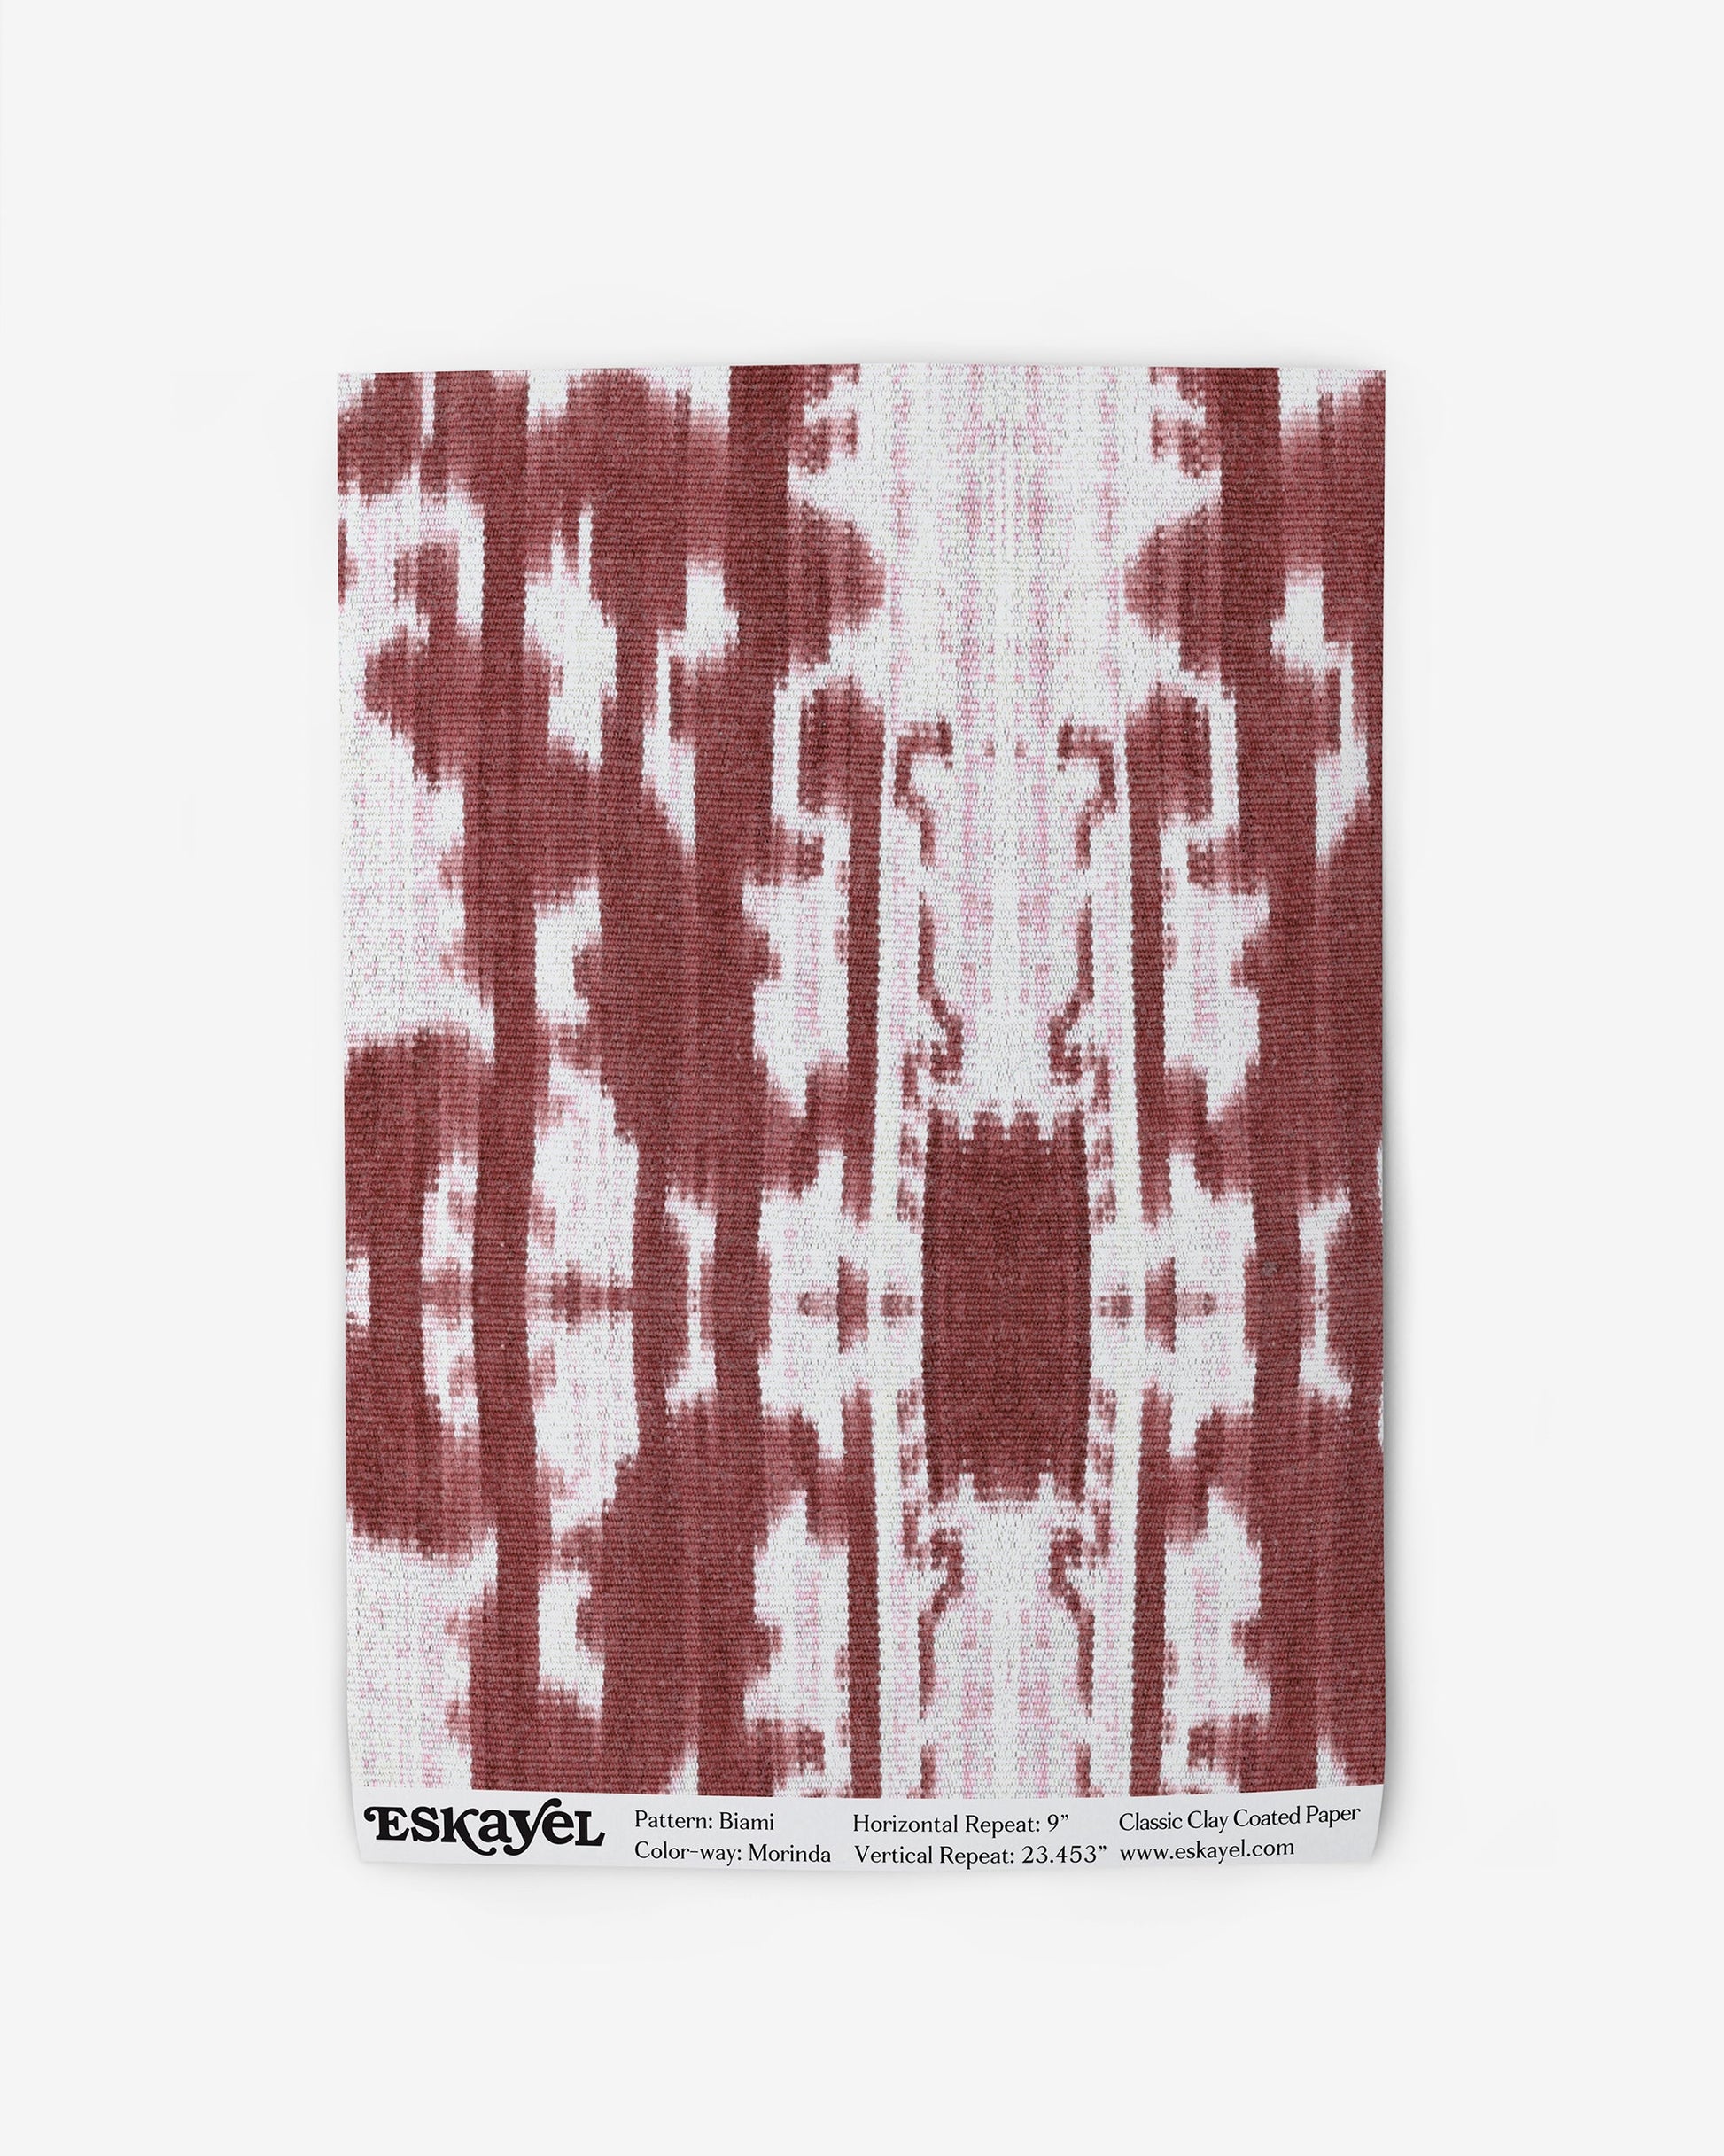 A red and white fabric with a Biami Wallpaper Morinda Ikat pattern on it